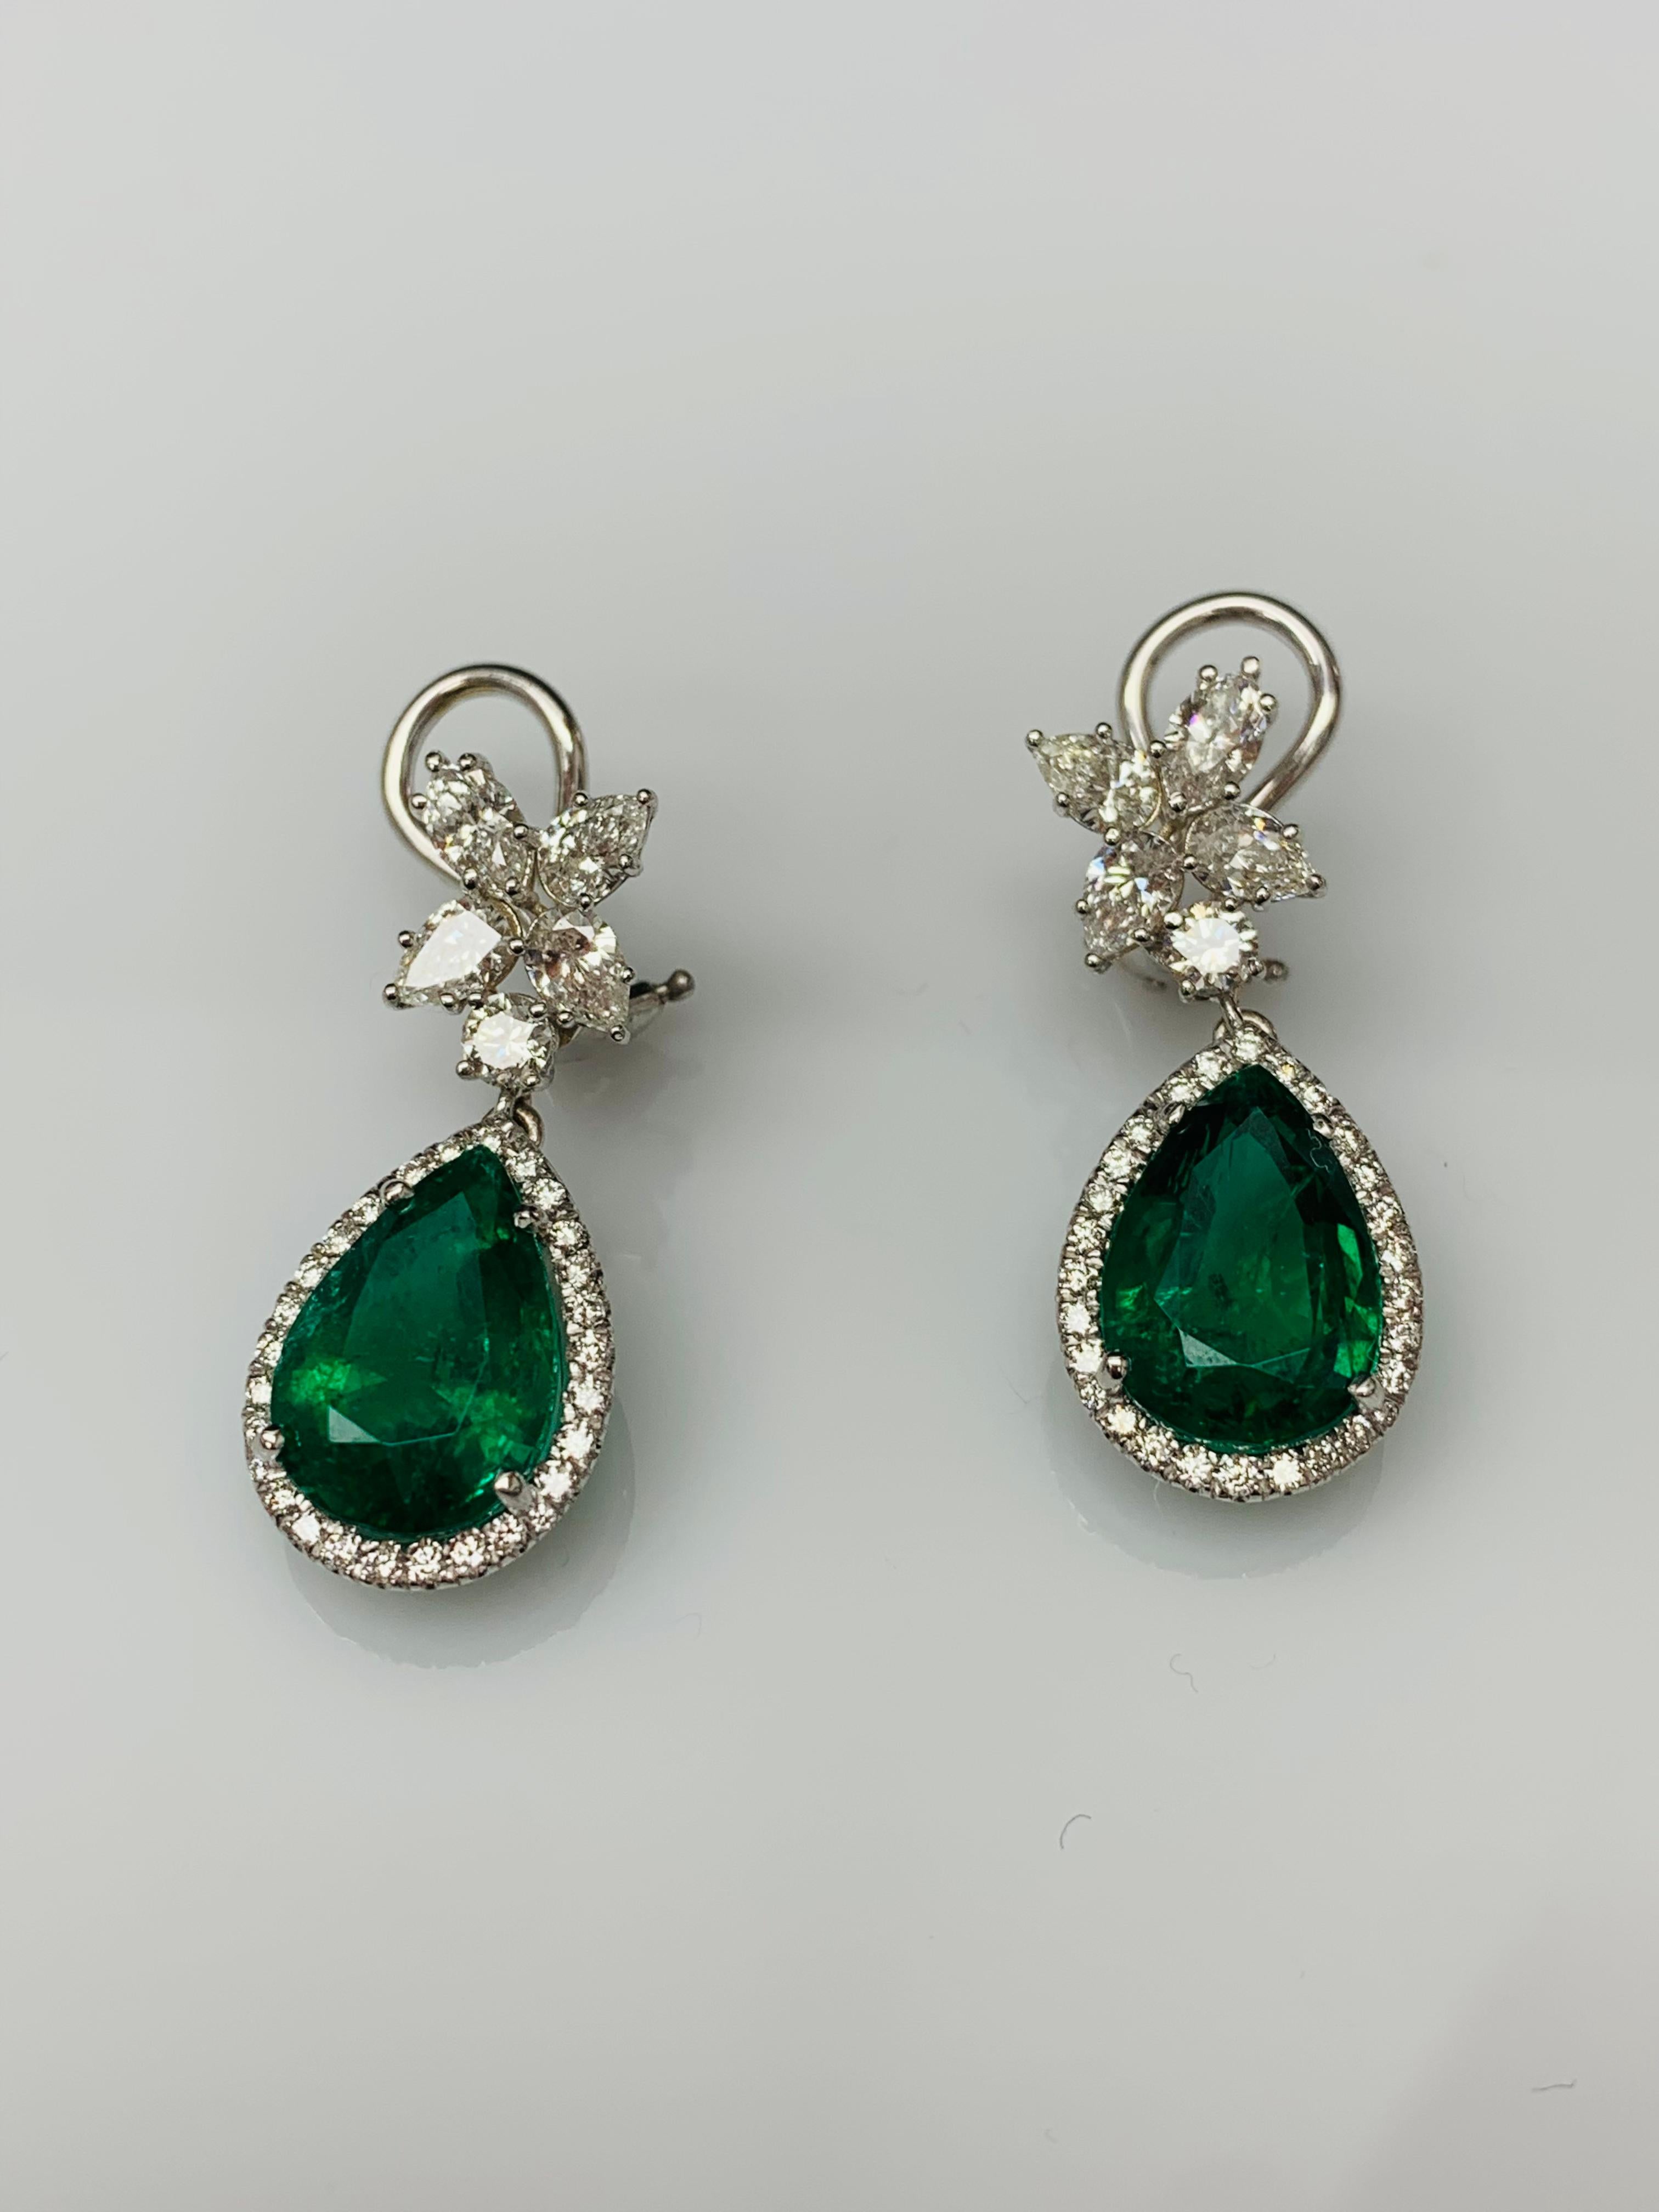 8.92 Carat of Pear Shape Emerald and Diamond Drop Earrings in 18K White Gold For Sale 9